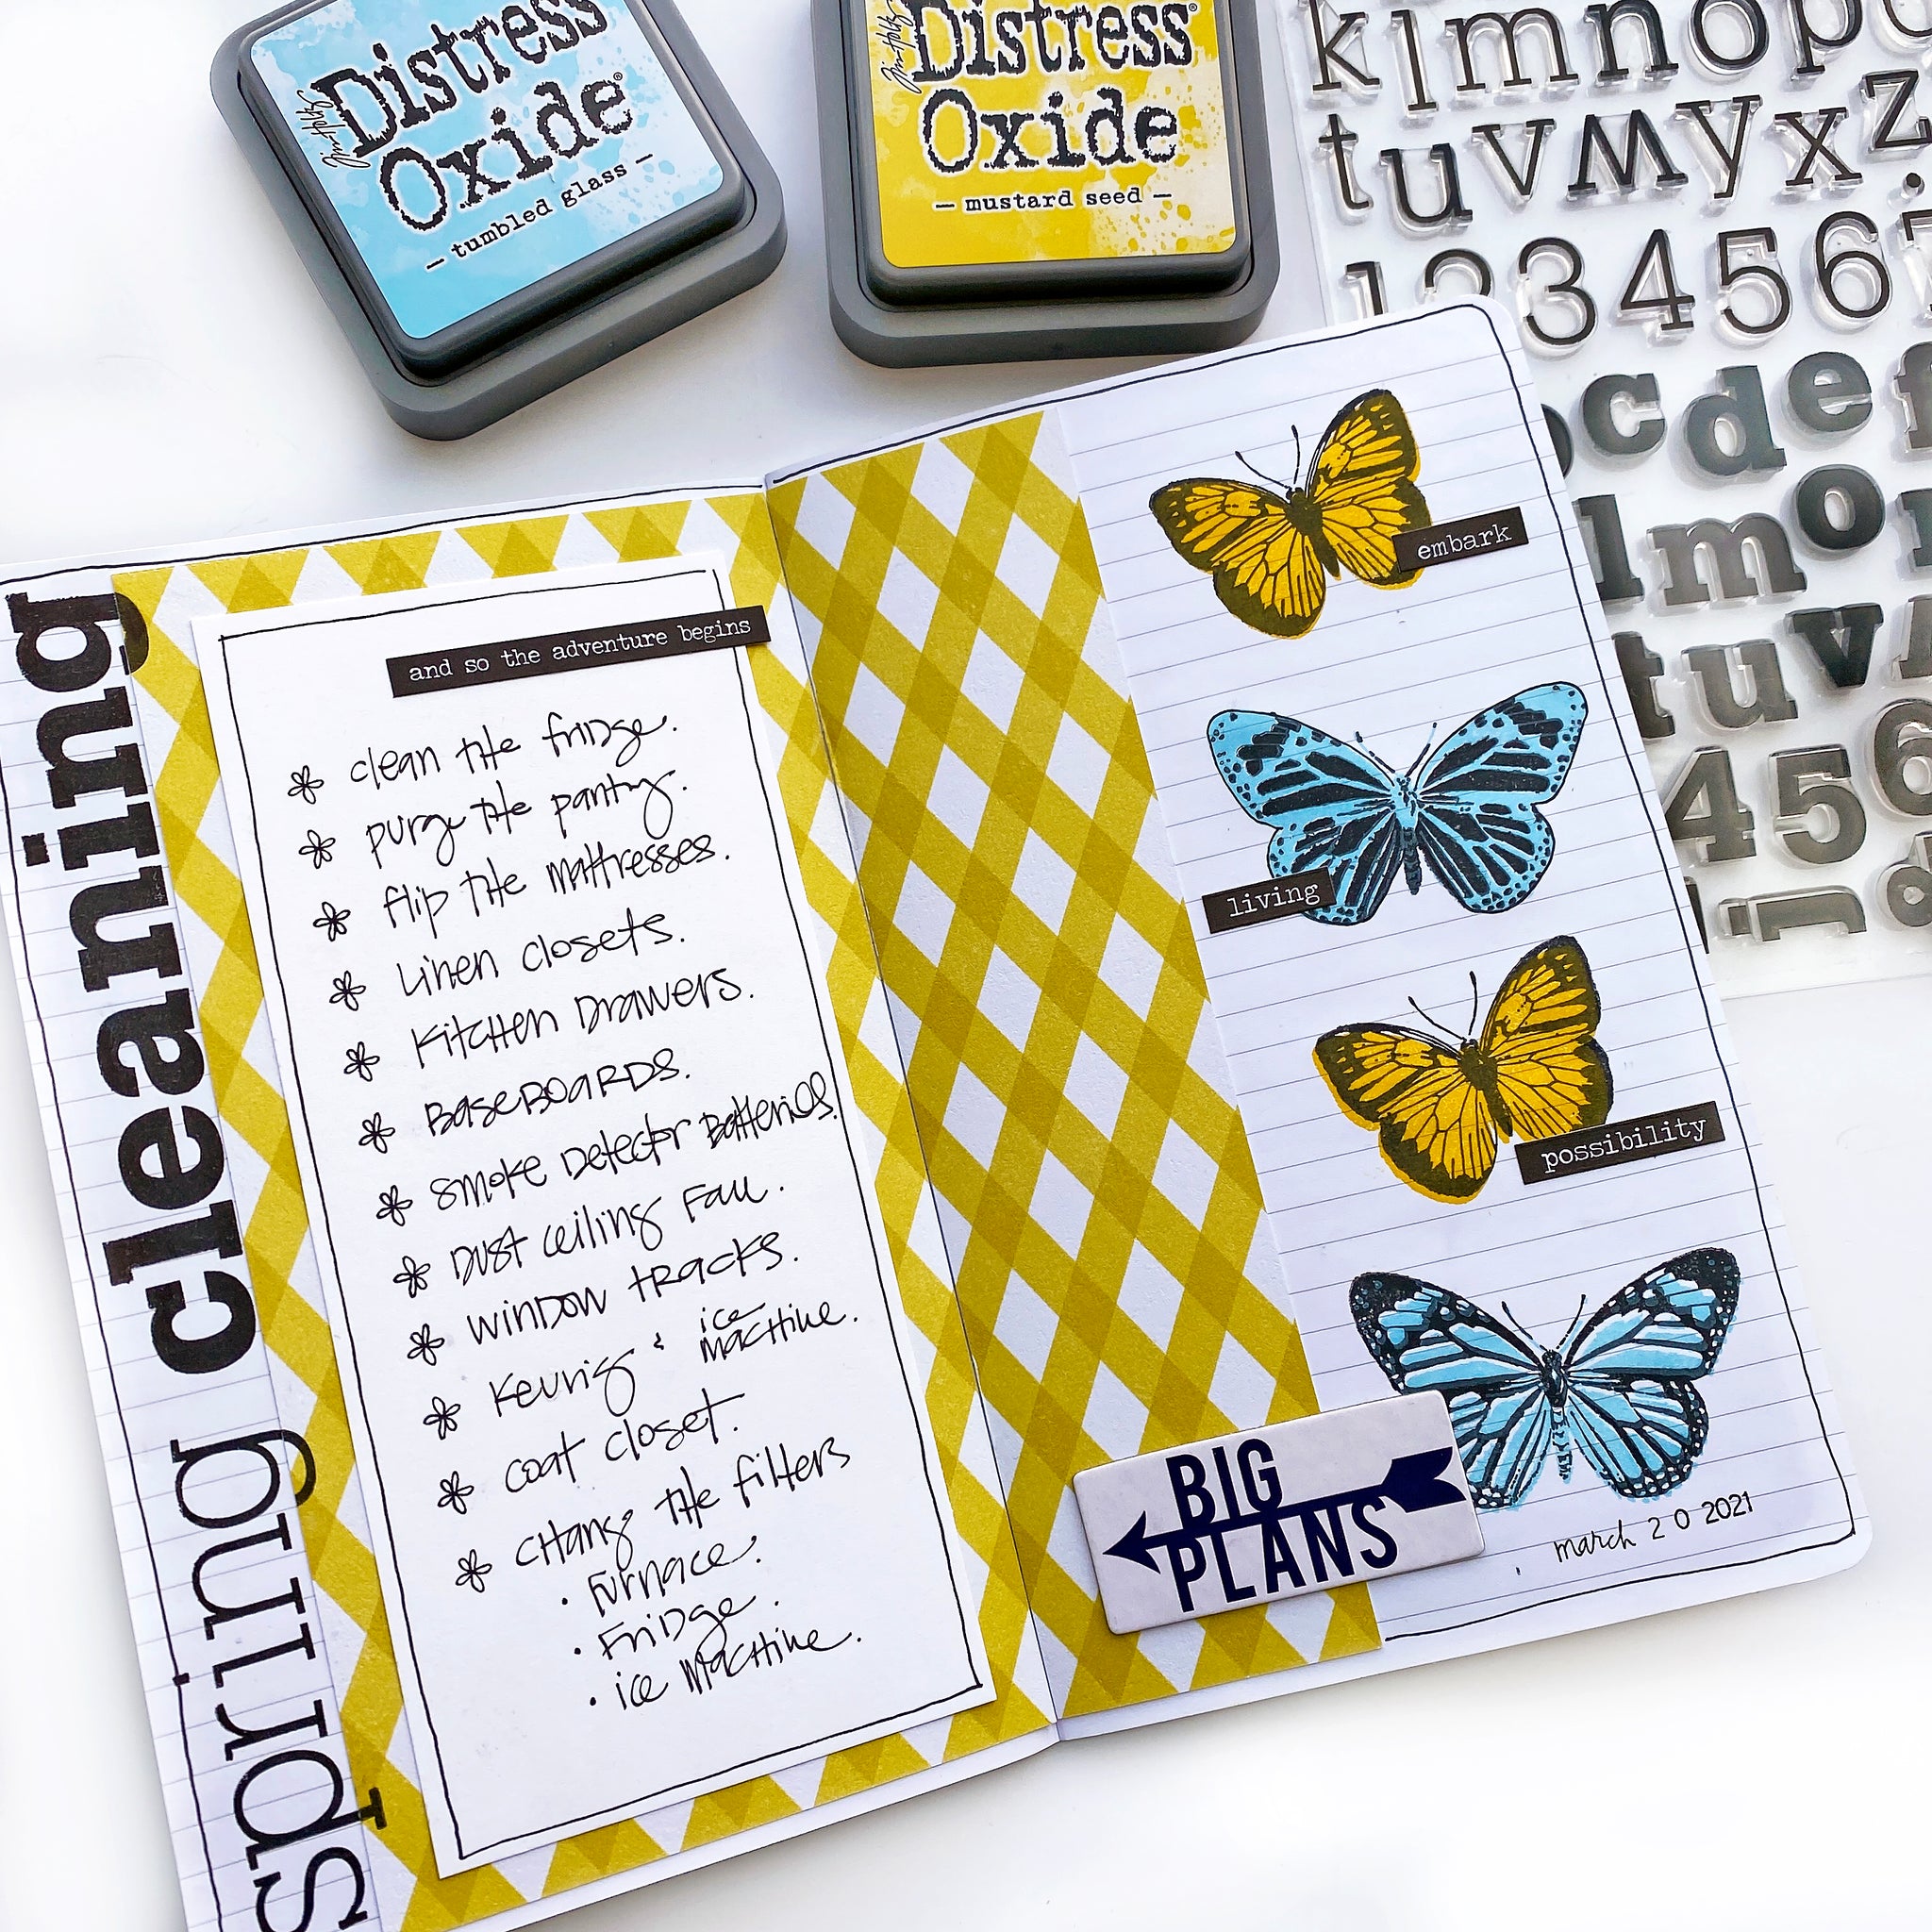 Tim Holtz Idea-ology Chitchat Word Stickers, Black and White Matte  Cardstock, 1088 Stickers, TH92998, 1/8